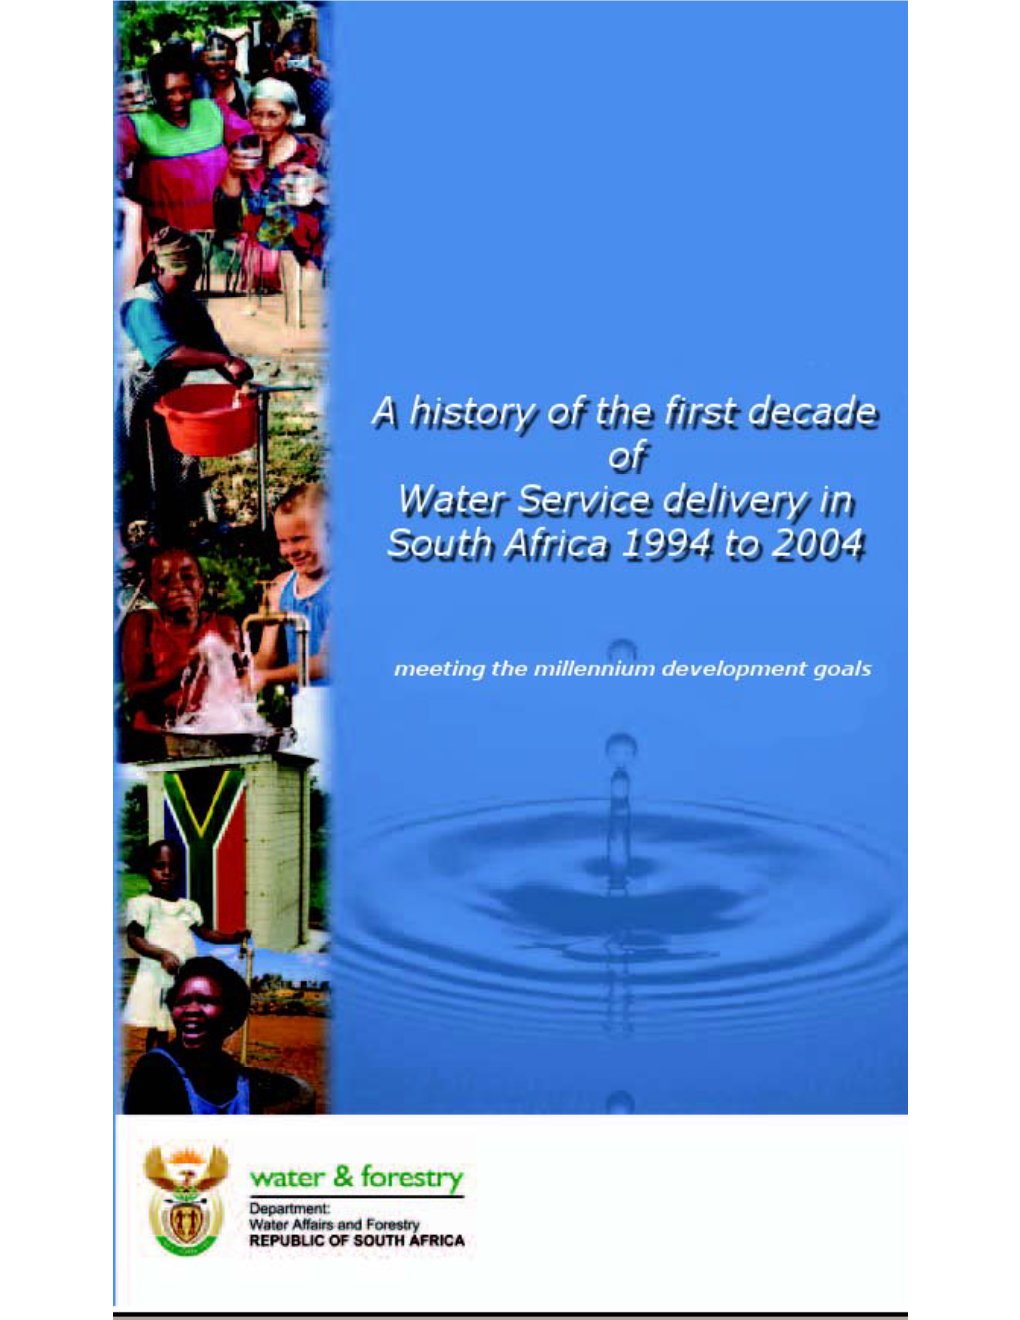 A History of the First Decade of Water Service Delivery in South Africa 1994